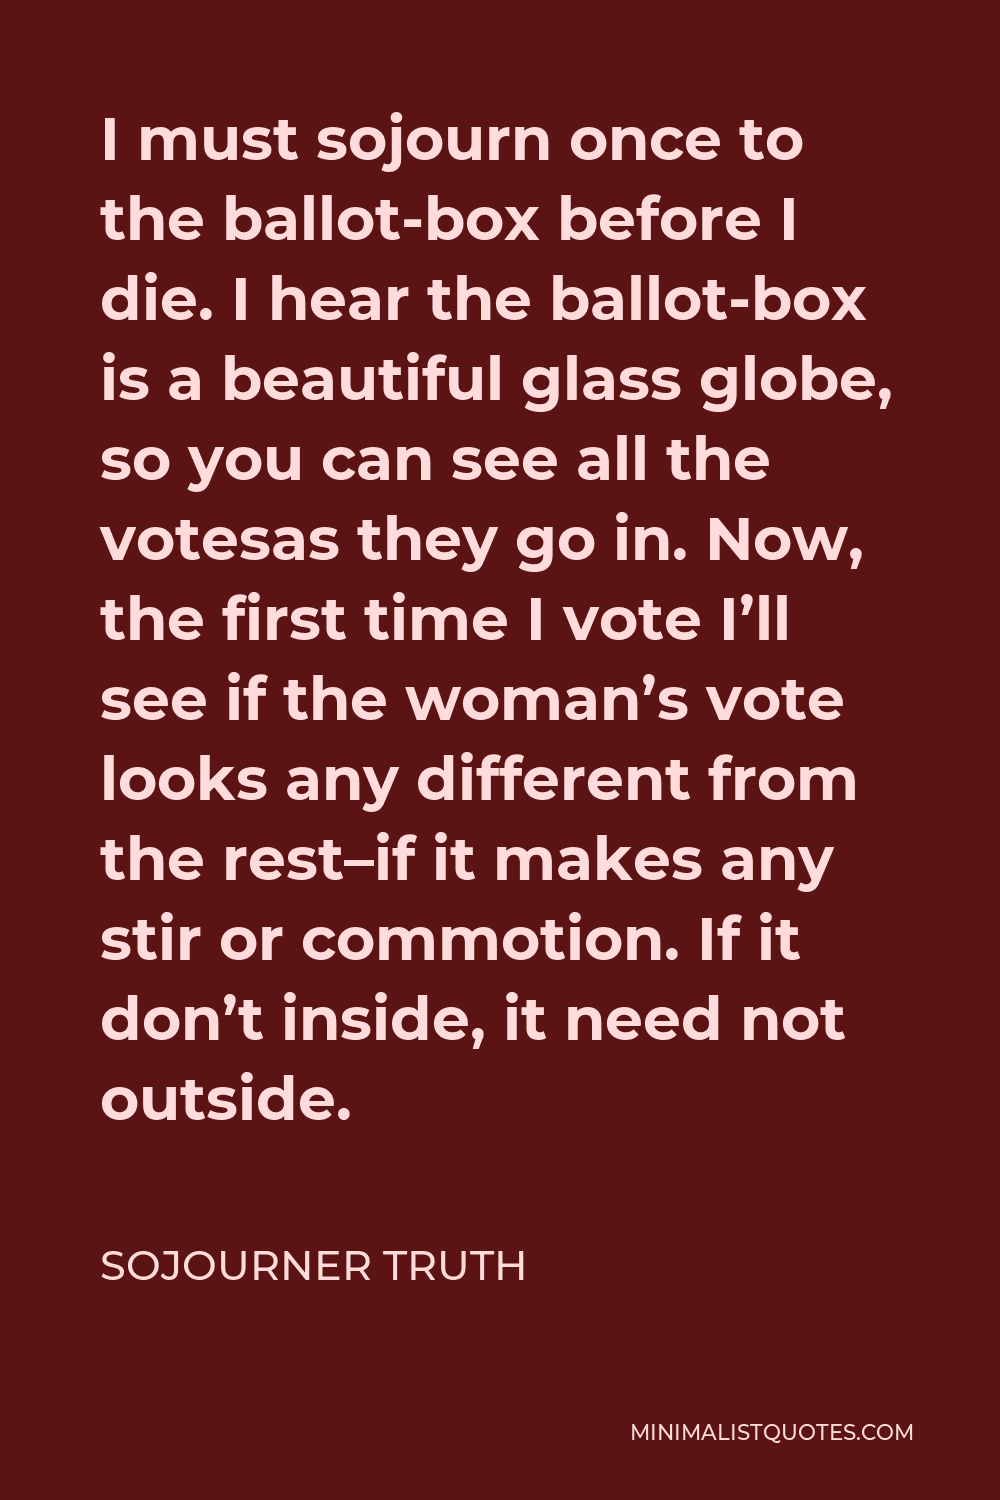 Sojourner Truth Quote - I must sojourn once to the ballot-box before I die. I hear the ballot-box is a beautiful glass globe, so you can see all the votesas they go in. Now, the first time I vote I’ll see if the woman’s vote looks any different from the rest–if it makes any stir or commotion. If it don’t inside, it need not outside.